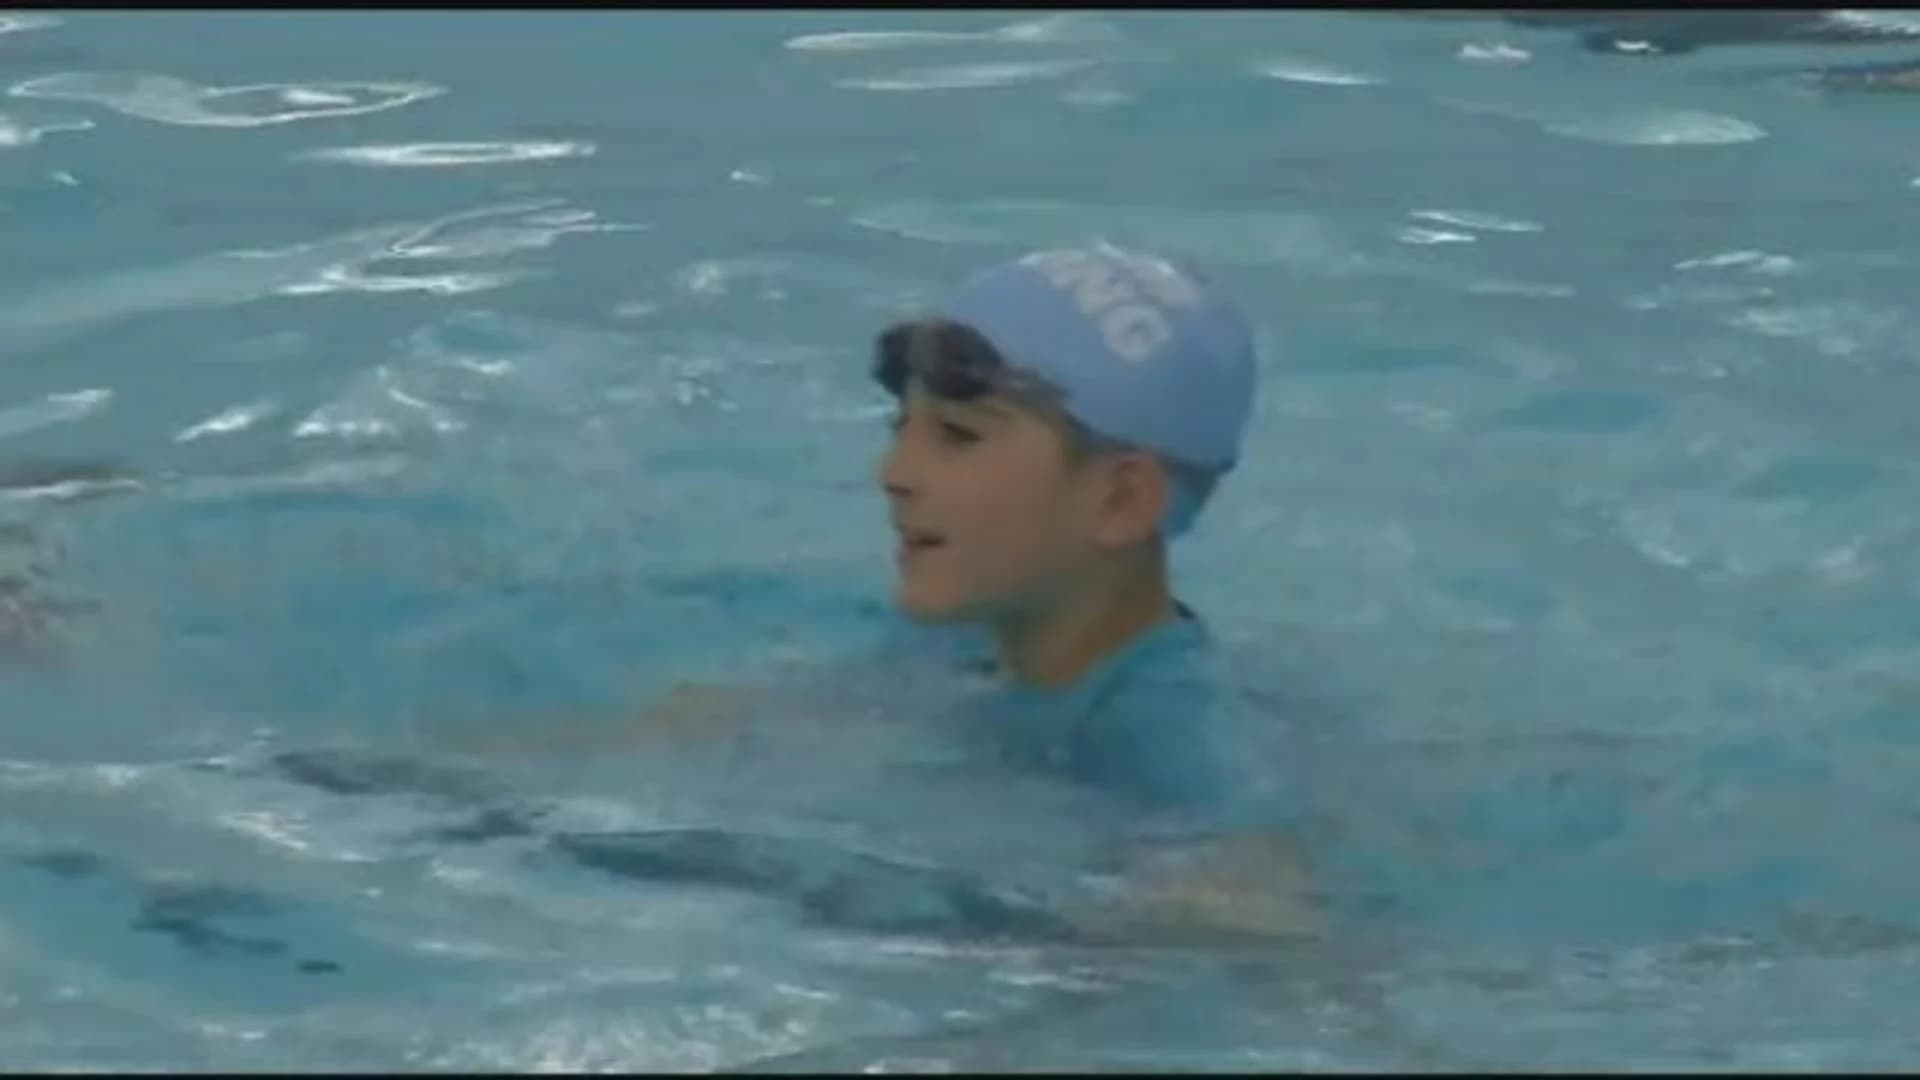 Swim Strong Foundation provides free swimming lesson